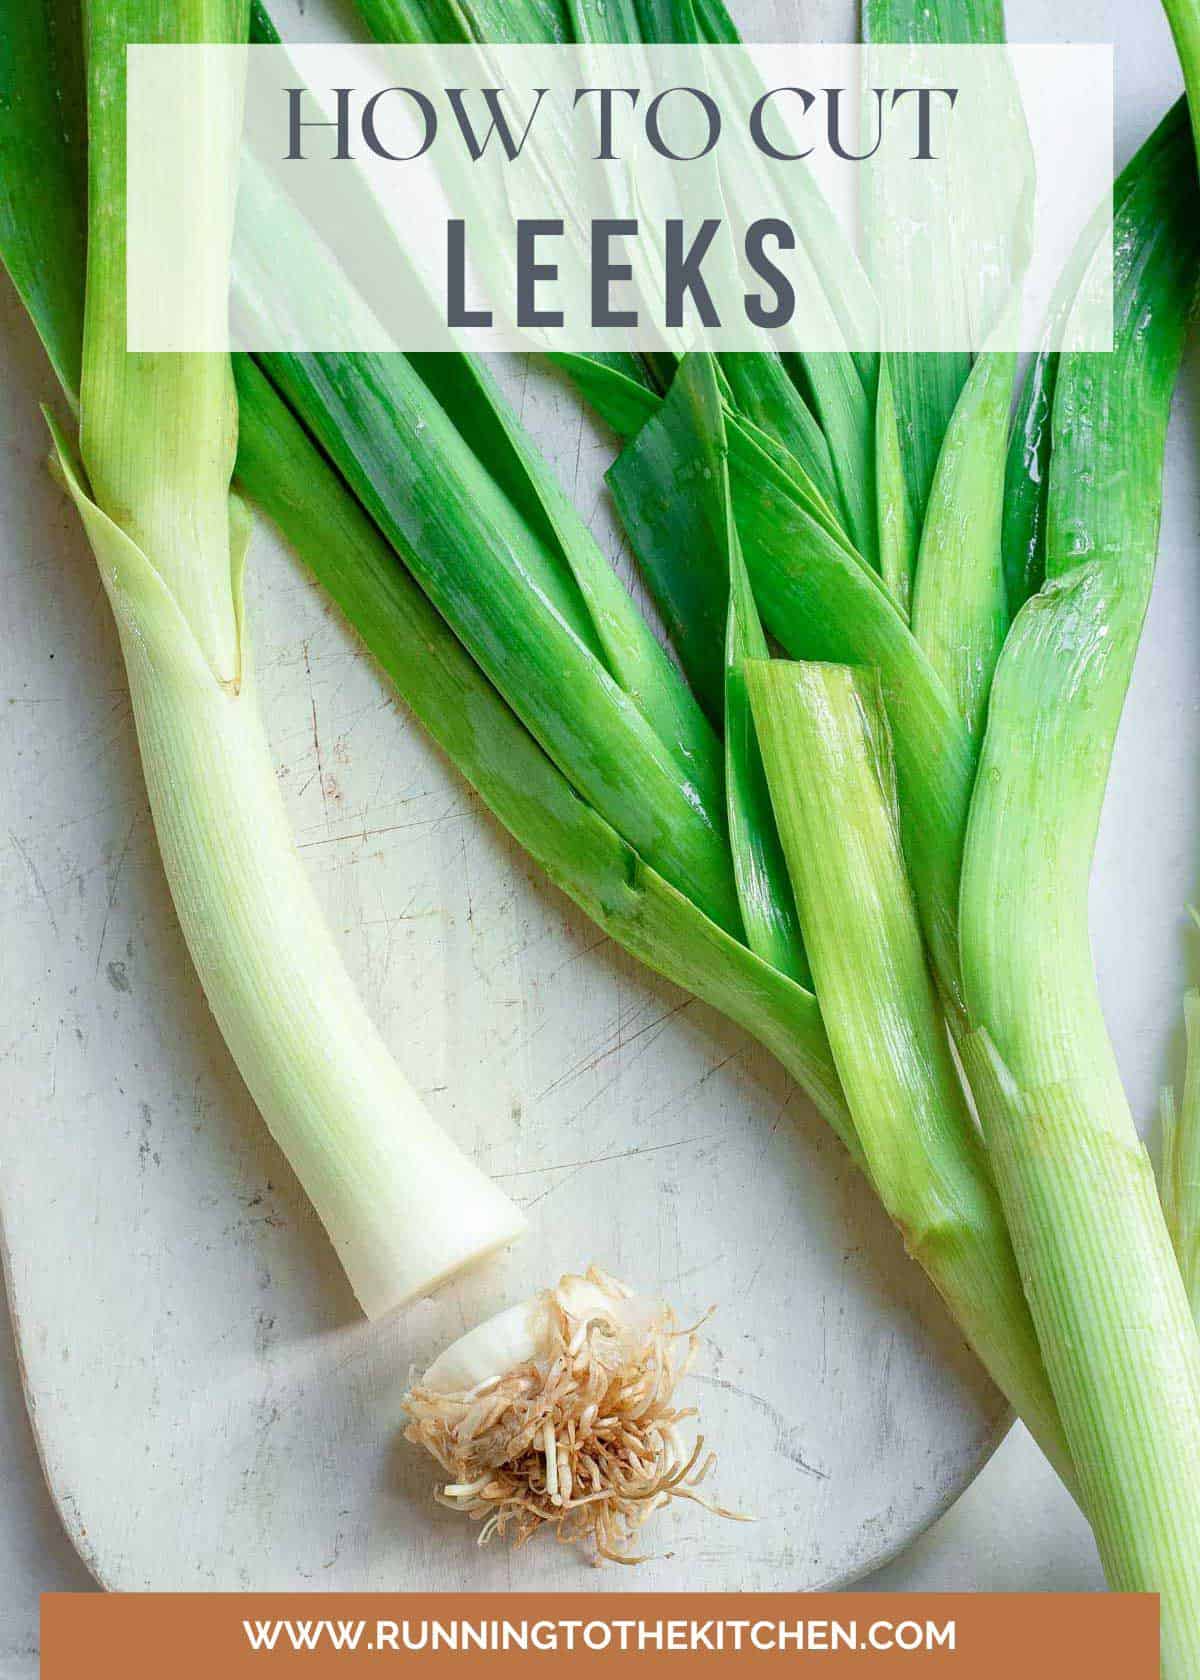 Cutting the root off a leek with text on the image that says "how to cut leeks".